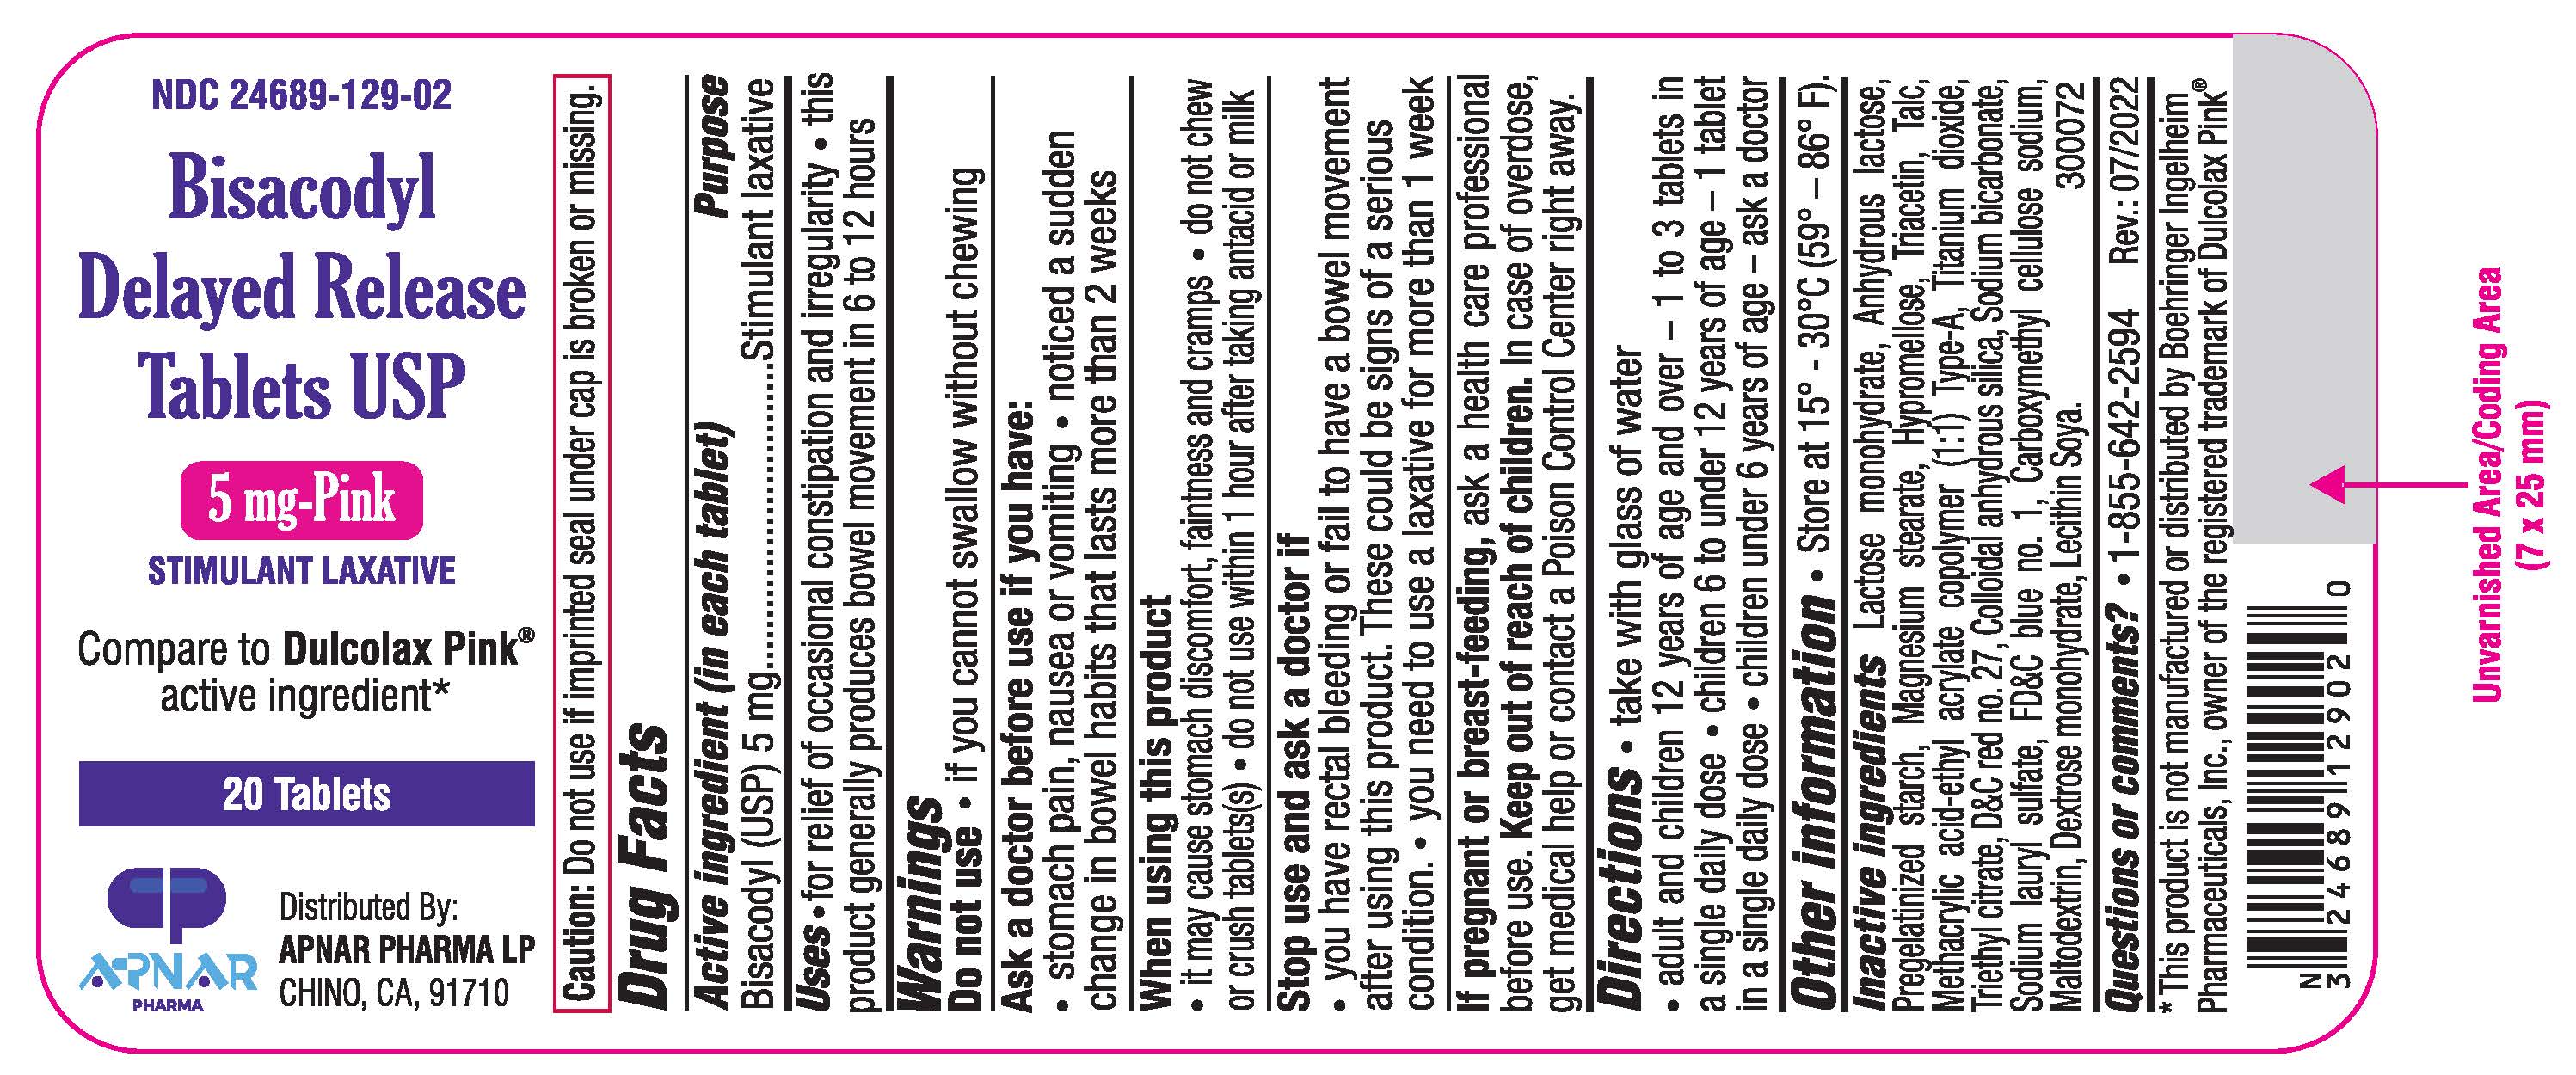 NDC: <a href=/NDC/24689-129-02>24689-129-02</a>  Bisacodyl Delayed Release Tablets USP   5 mg- Pink  20 Tablets  300072